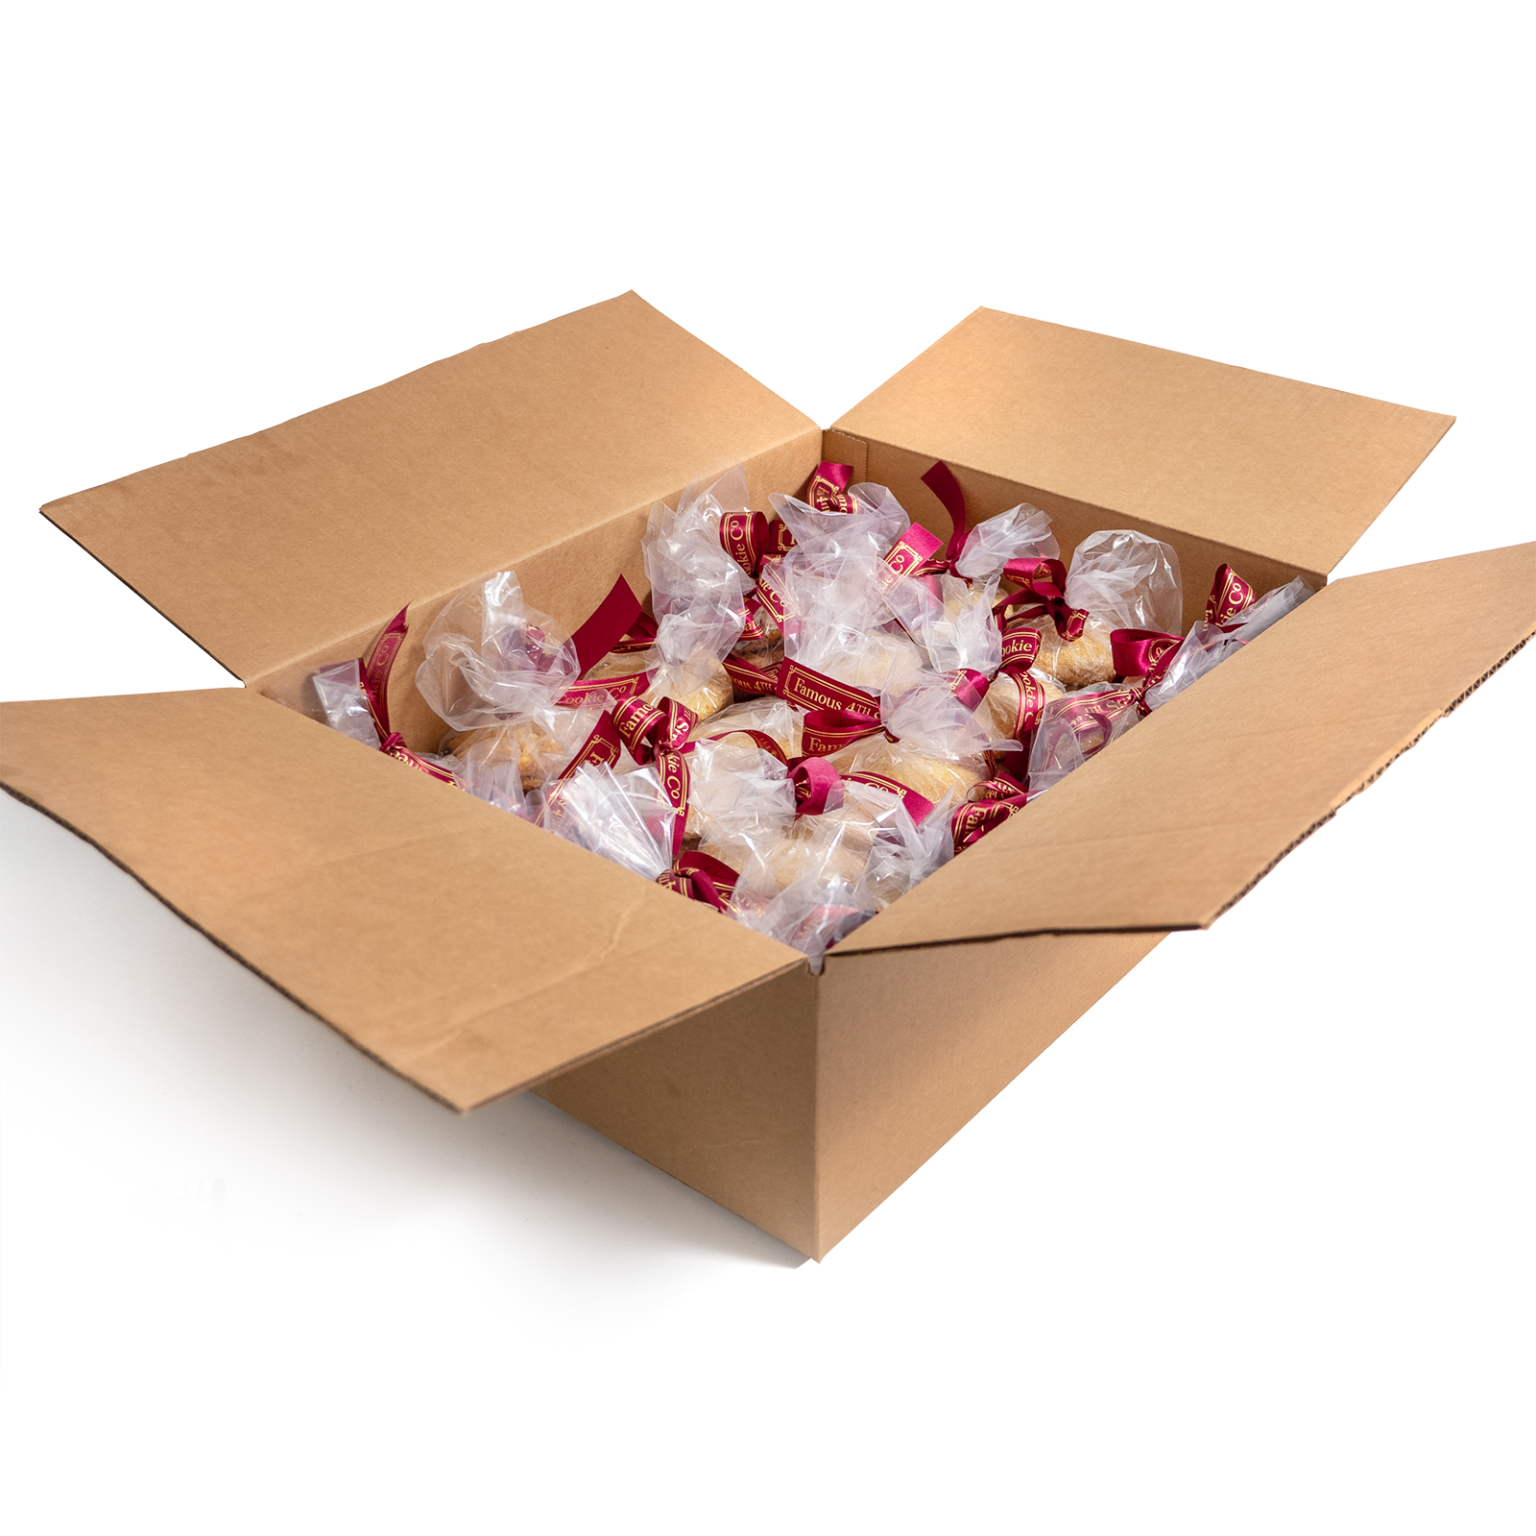 Brown cardboard box containing Personal Gift Bags